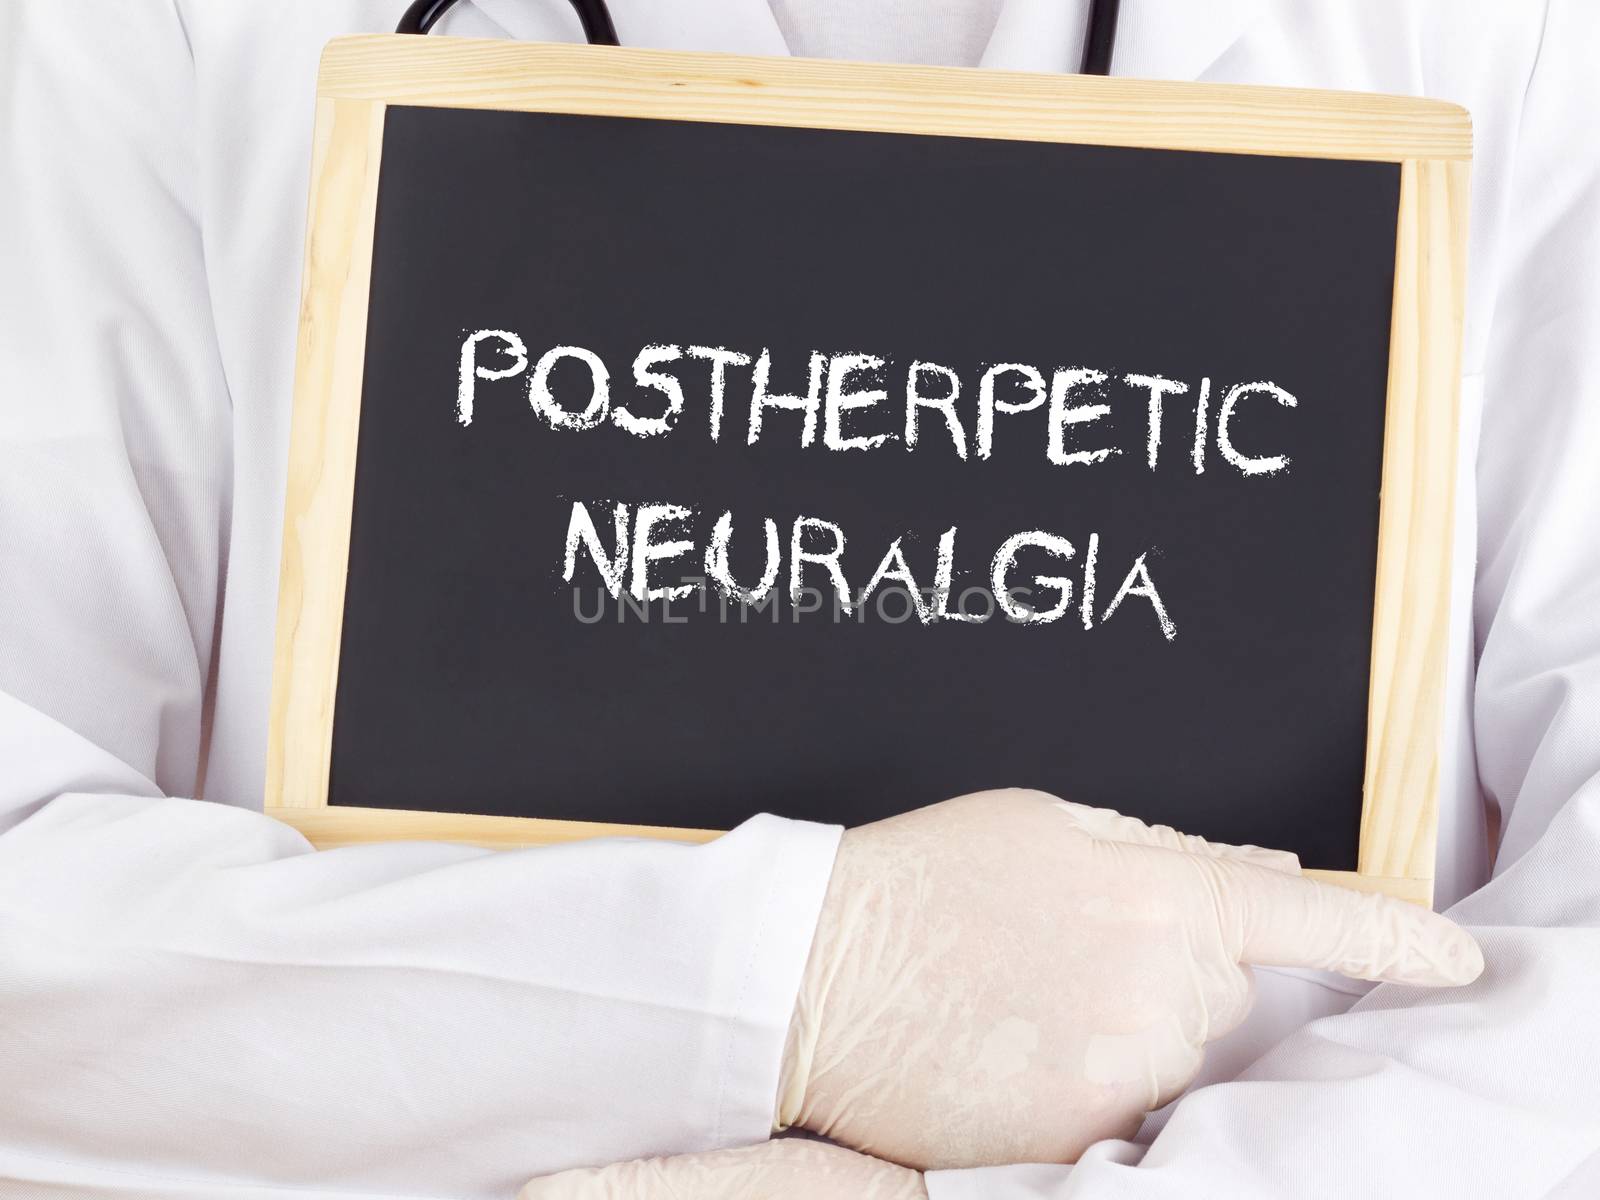 Doctor shows information: postherpetic neuralgia